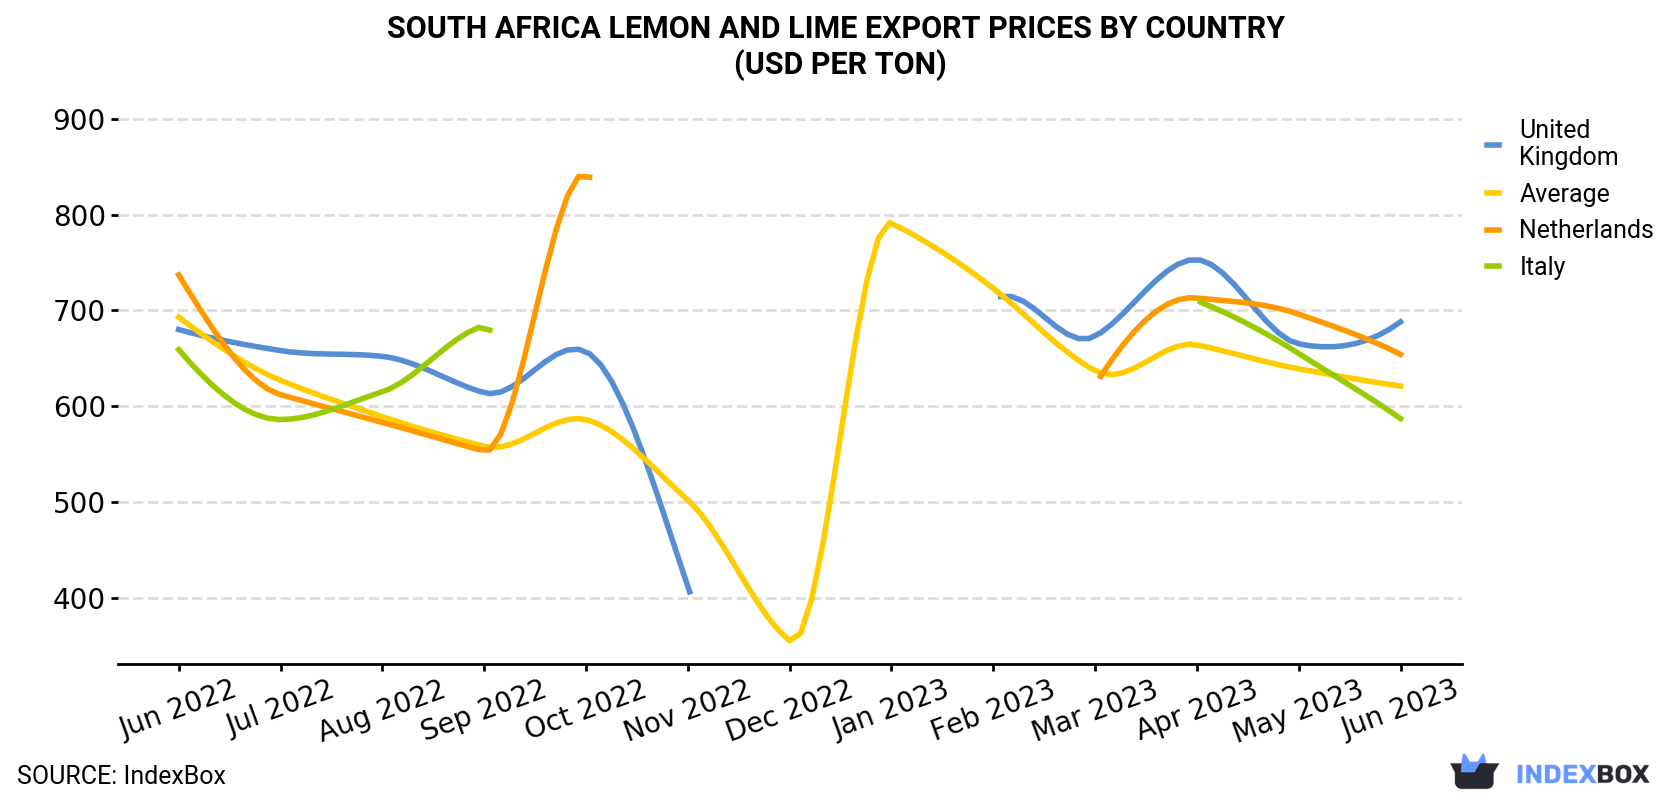 South Africa Lemon And Lime Export Prices By Country (USD Per Ton)